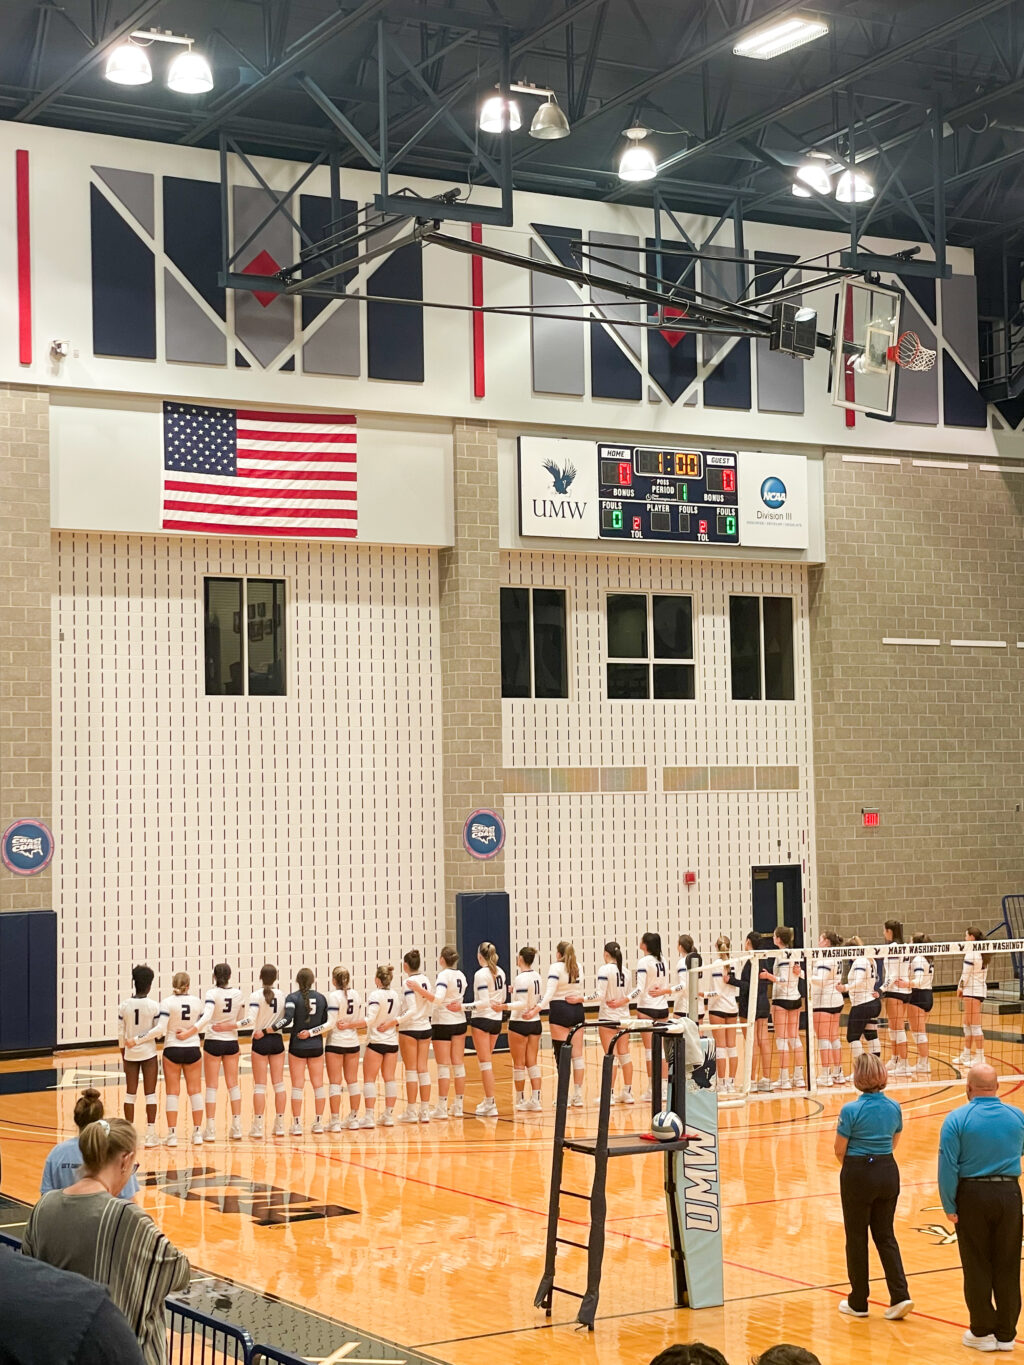 mage of a large group of womens volleyball players lined up side by side on a volleyball court.